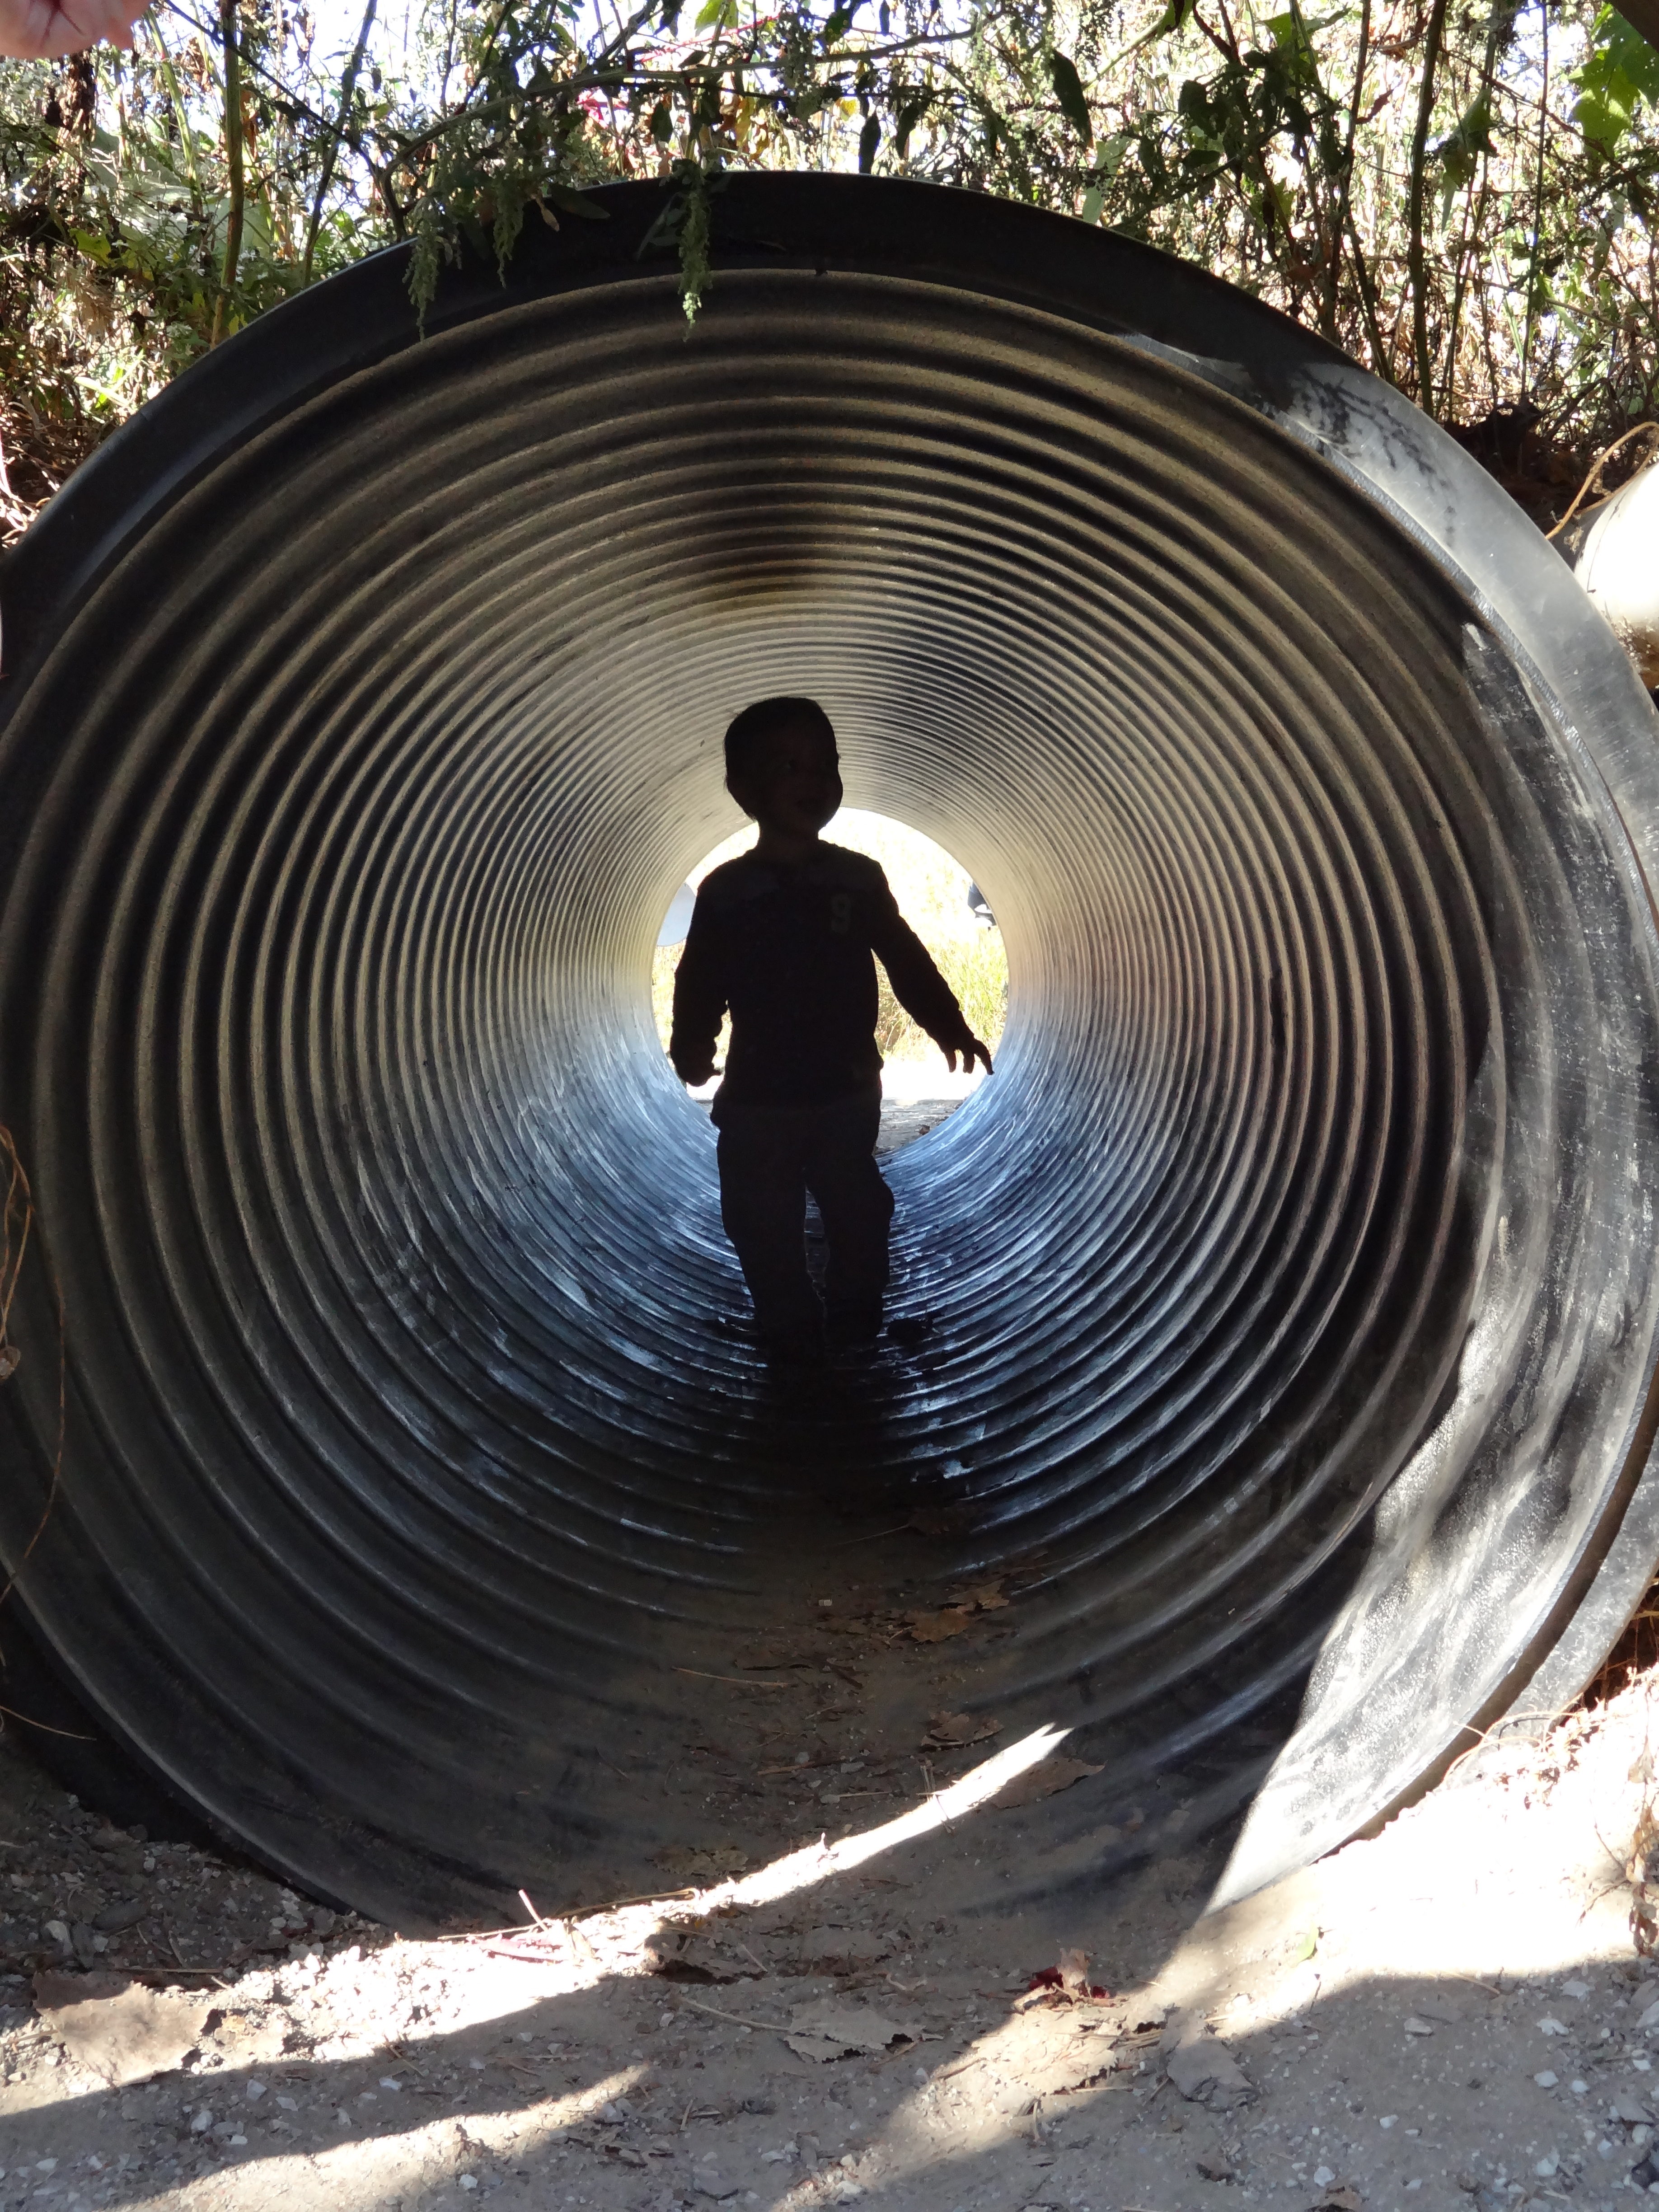 Tunnel in the Imagination Forest play area.